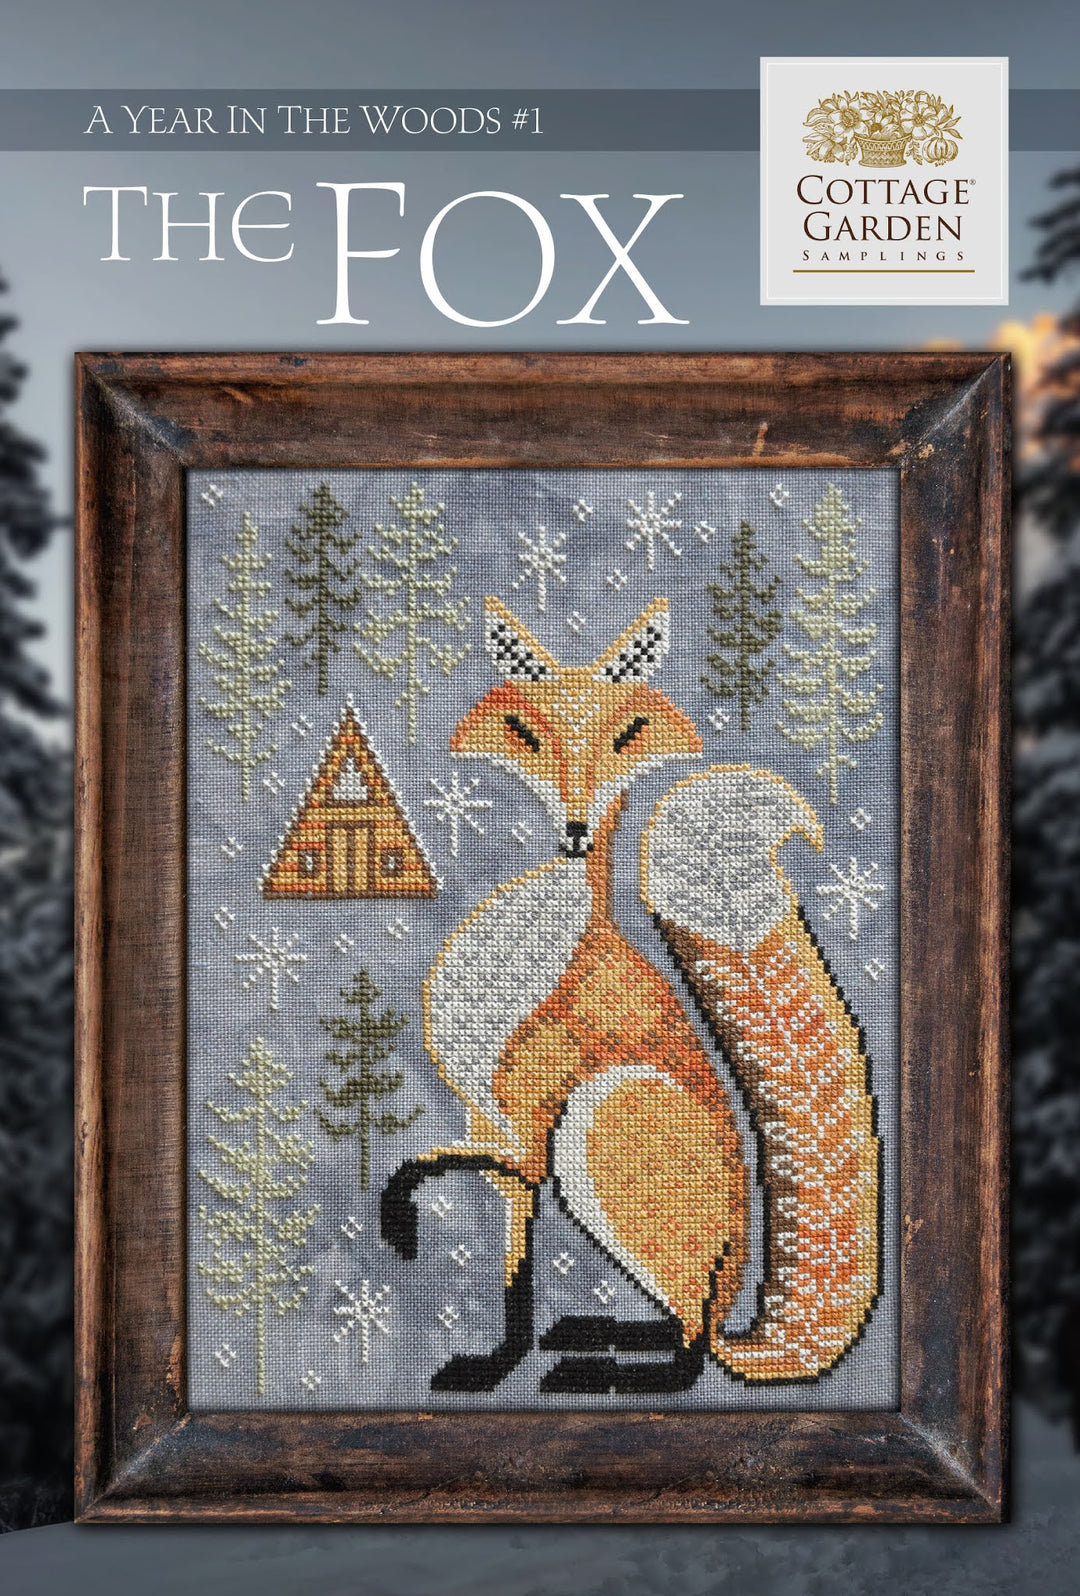 The Fox, A Year in the Woods #1 | Cottage Garden Samplings